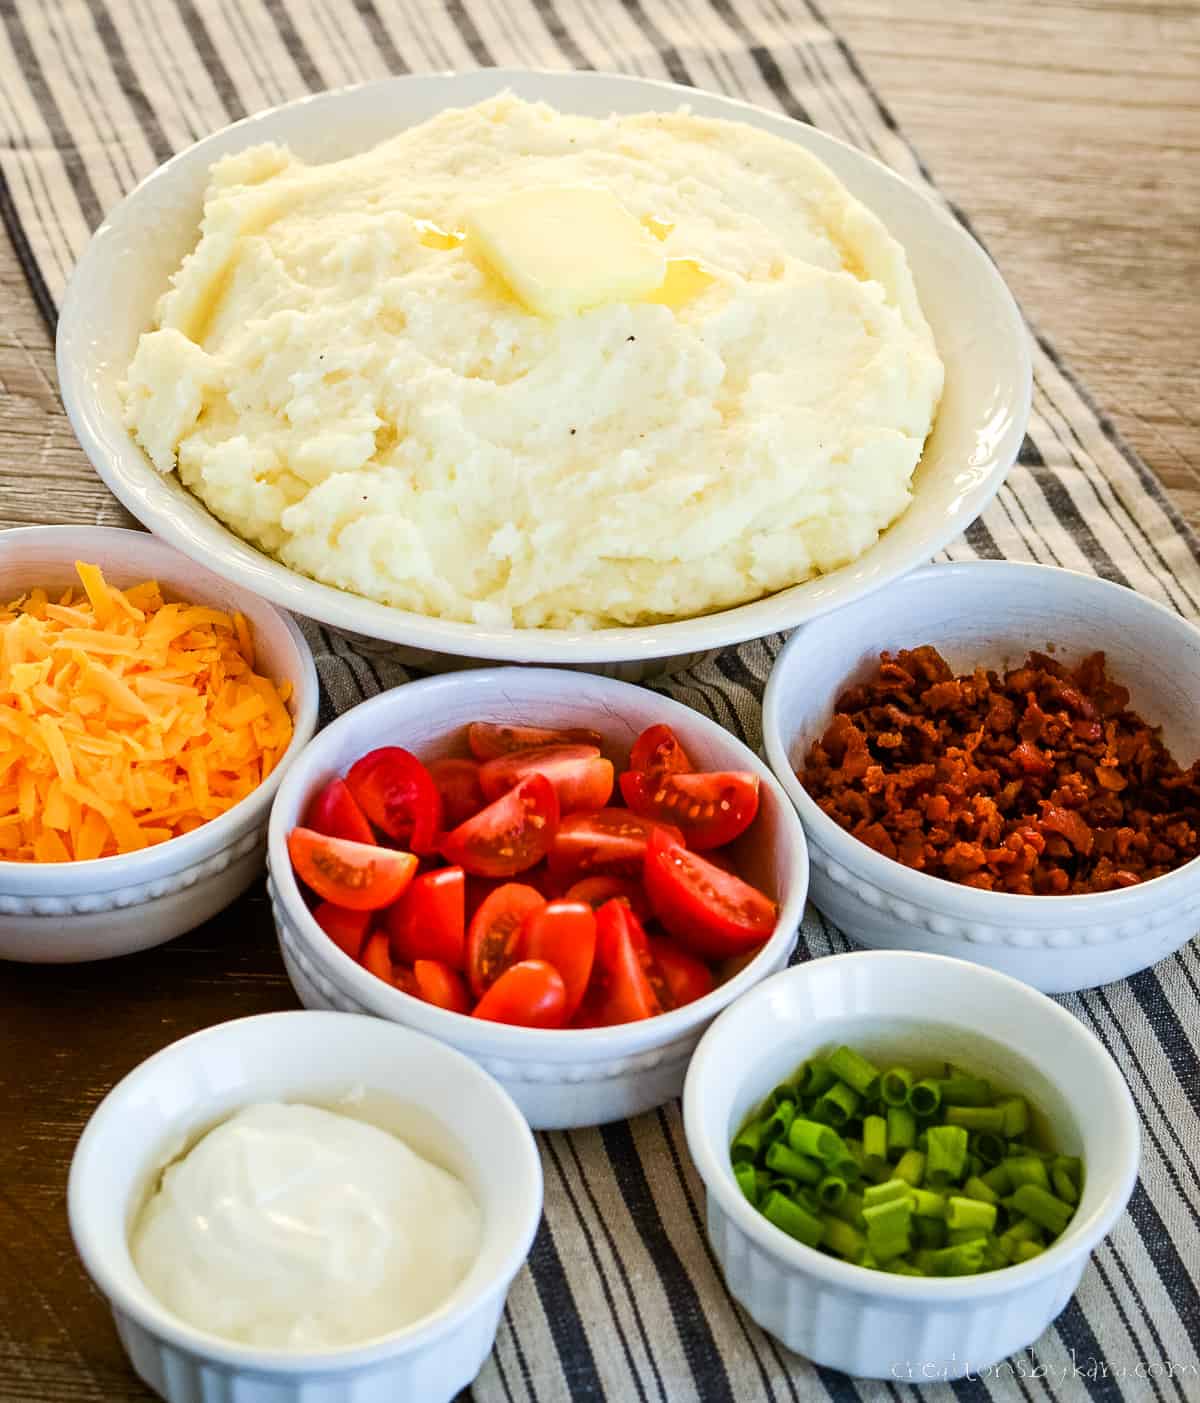 mashed potatoes with bowls of toppings